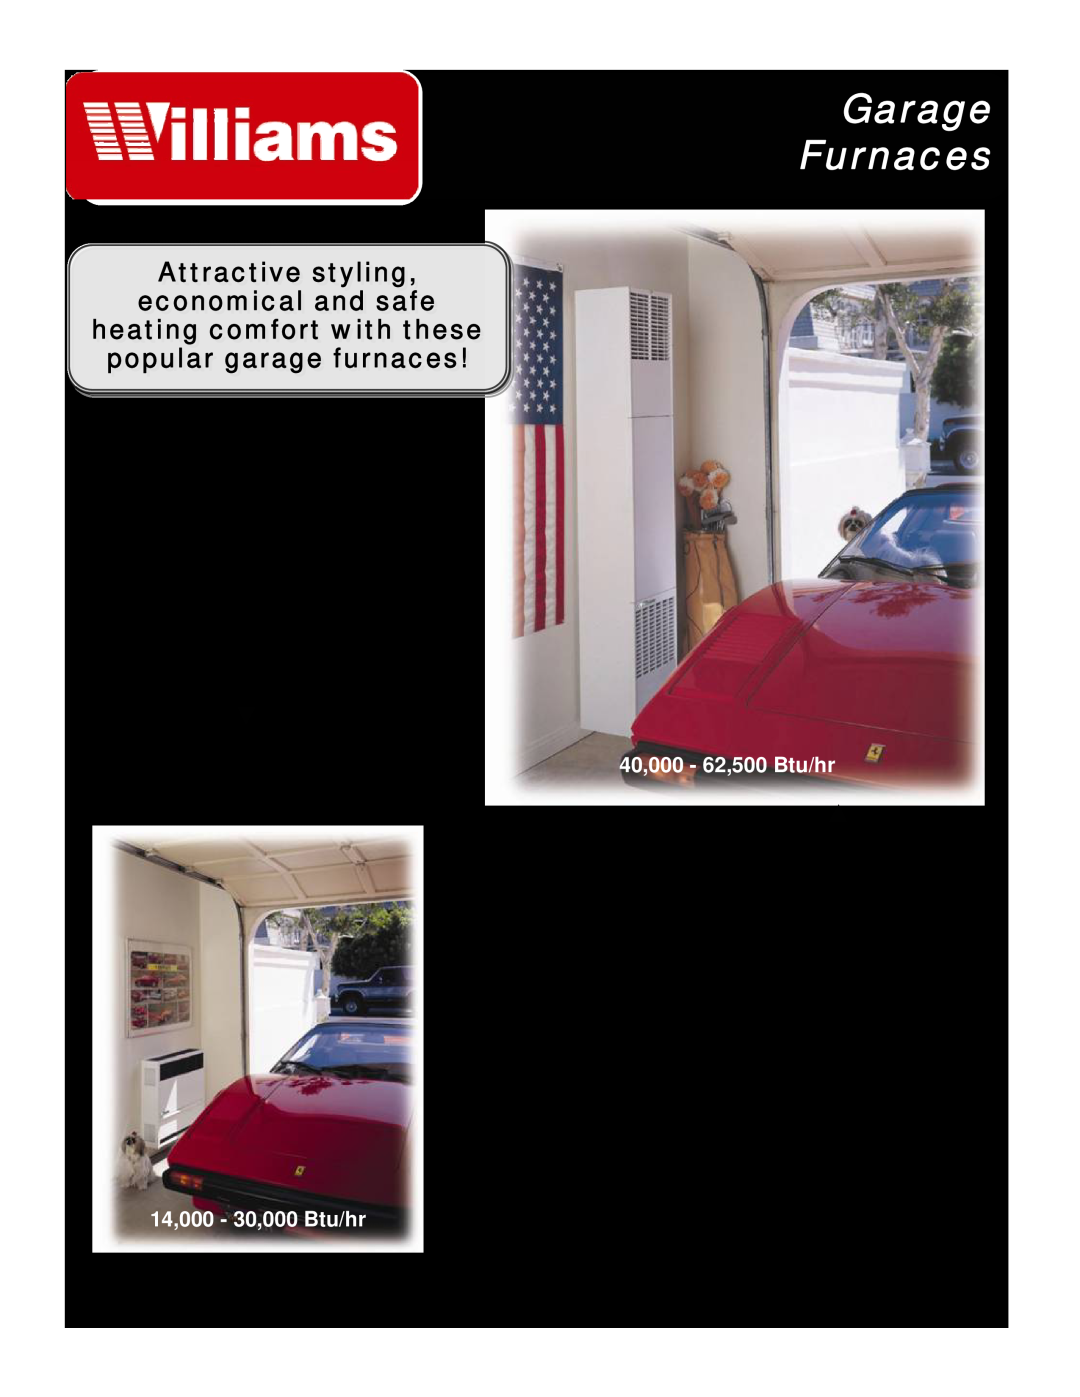 Williams 67046703 manual Garage Furnaces, Design Features, Attractivettr ti styling,t li, Direct-Vent, Counterflow models 